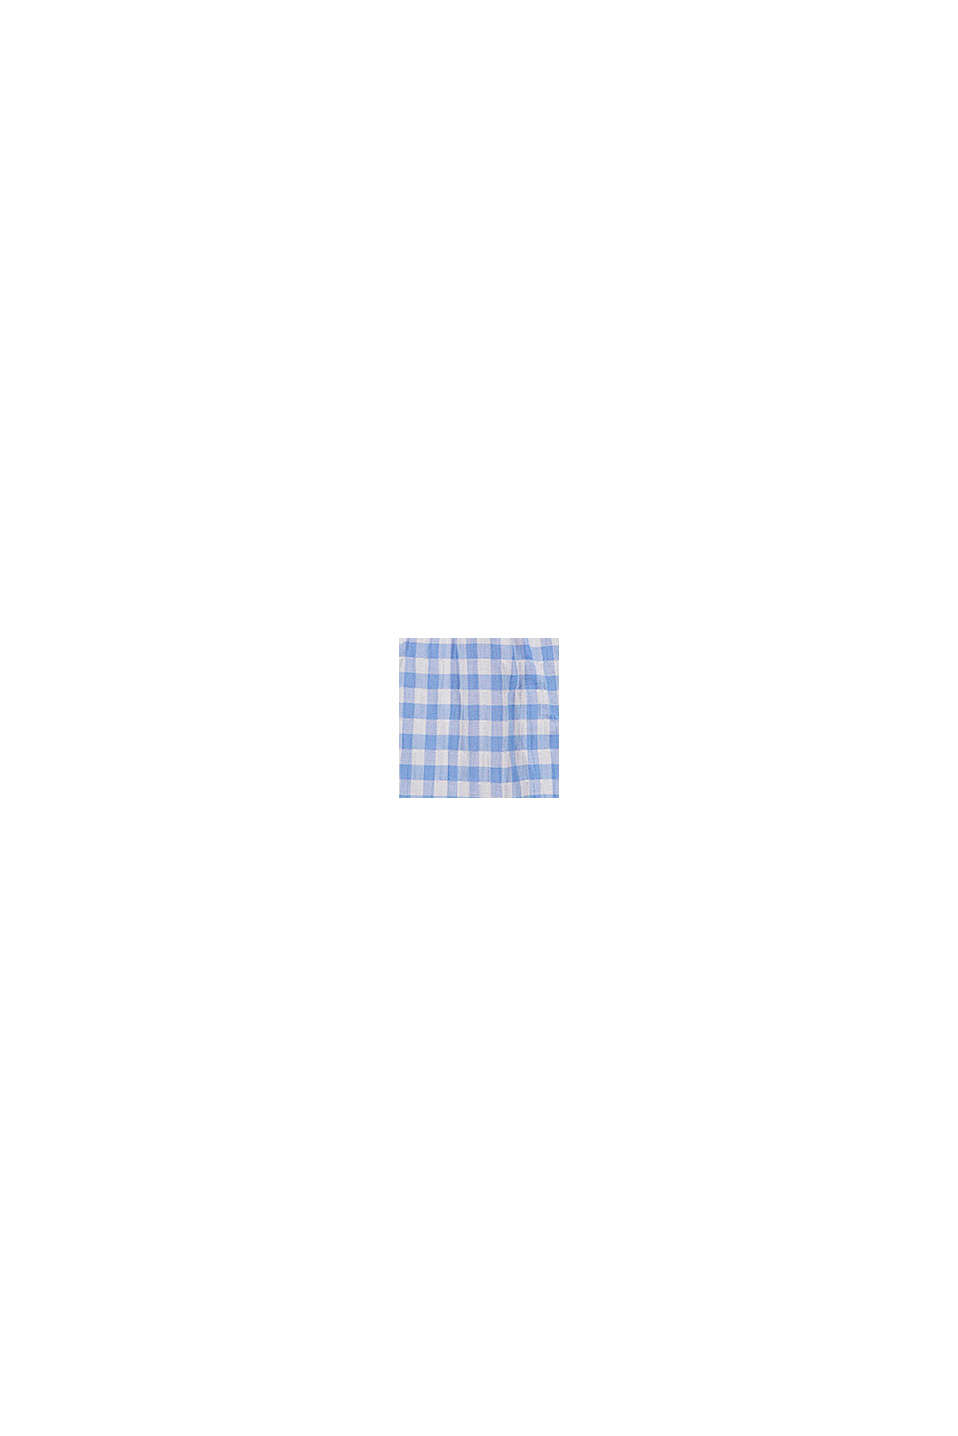 Gingham check blouse with frills, 100% cotton, LIGHT BLUE, swatch